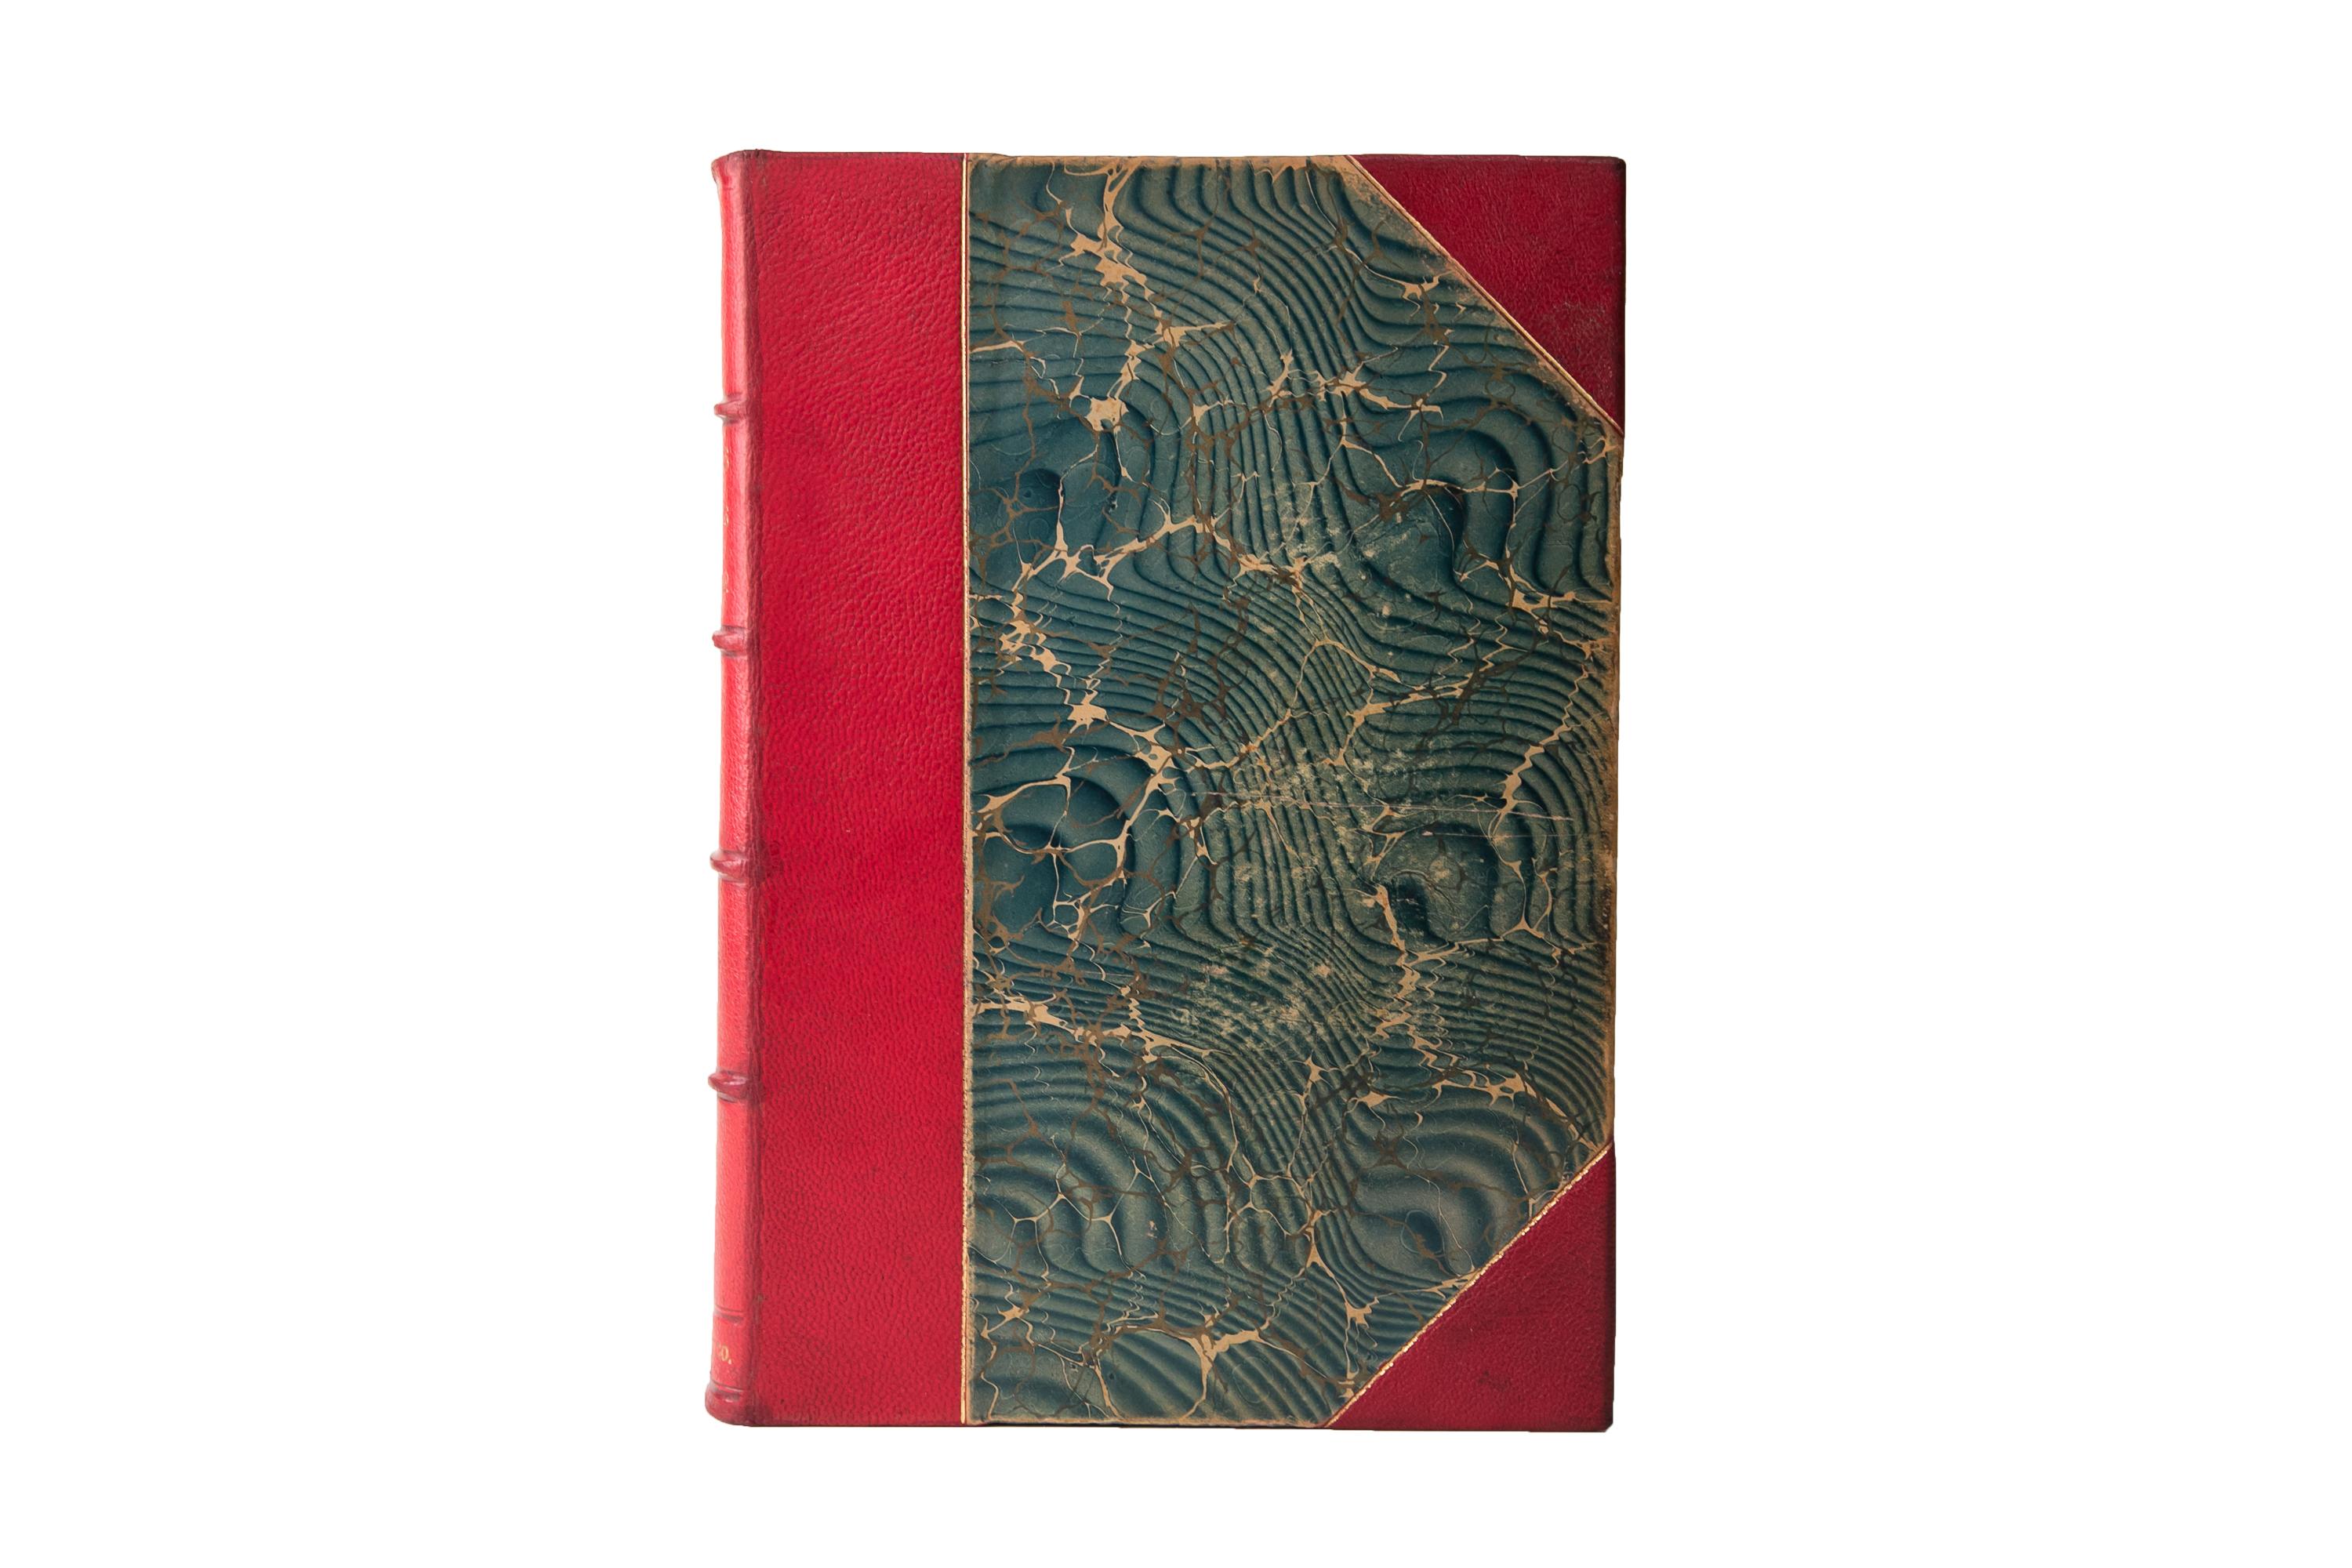 4 Volumes. Johnson & Buel, Battles and Leaders of the Civil War. Bound in 3/4 red morocco and marbled boards, bordered in gilt tooling. Raised bands with panels displaying wreath details and label lettering in gilt tooling. The top edges are gilt